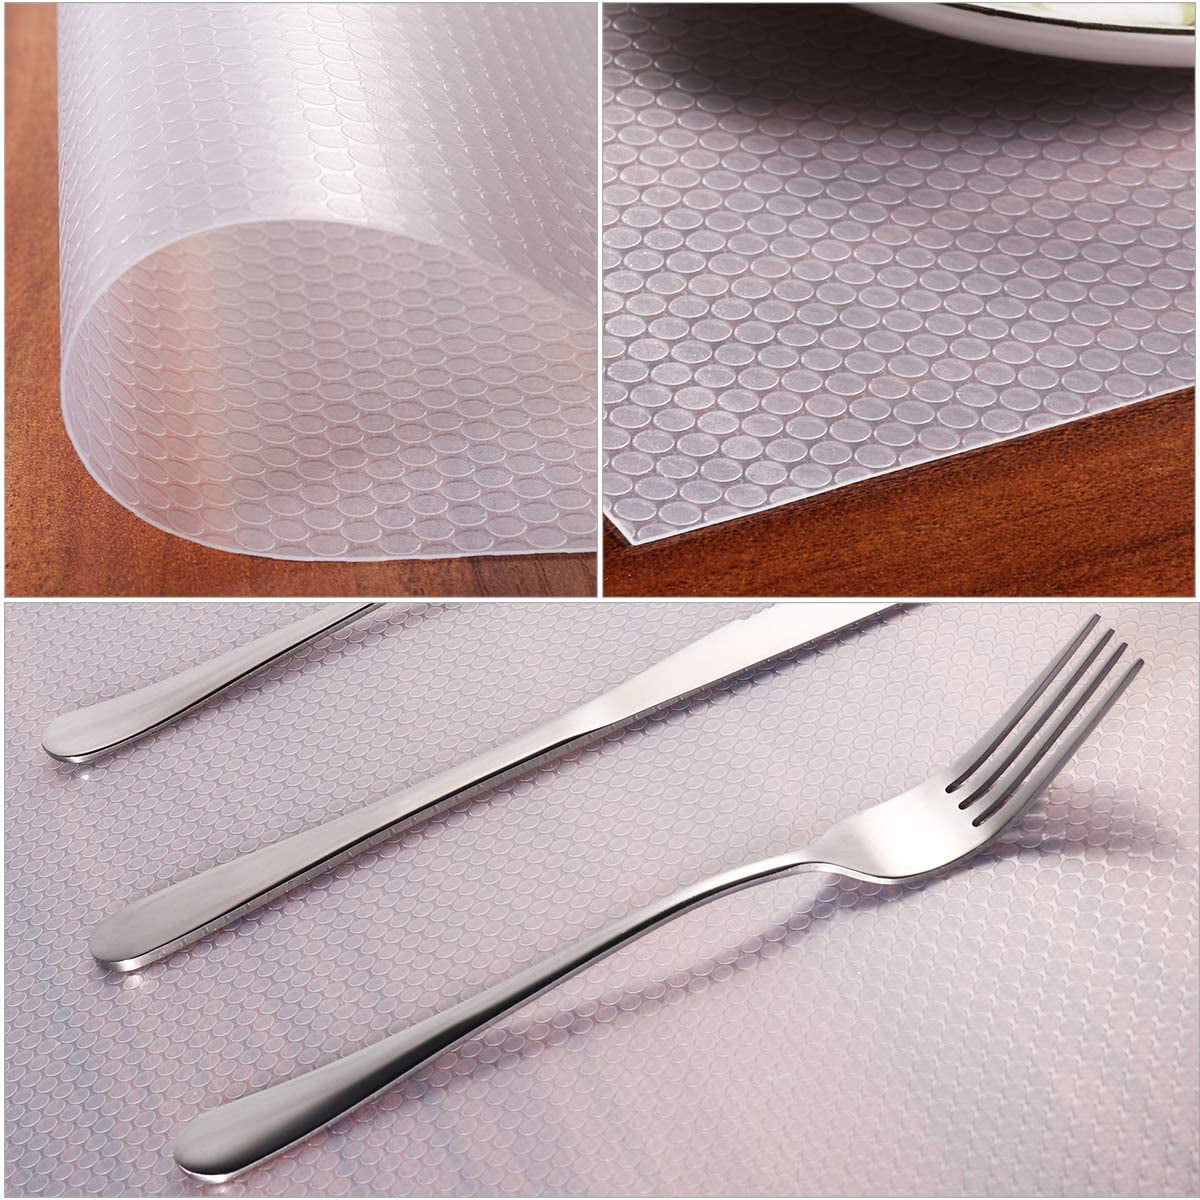 Plastic Shelf Liners Cabinet Drawer Liner Non-Slip Shelf Liner Non-Adhesive  Refrigerator Mat Cupboard Pad No Odor for Kitchen Home-Clear 